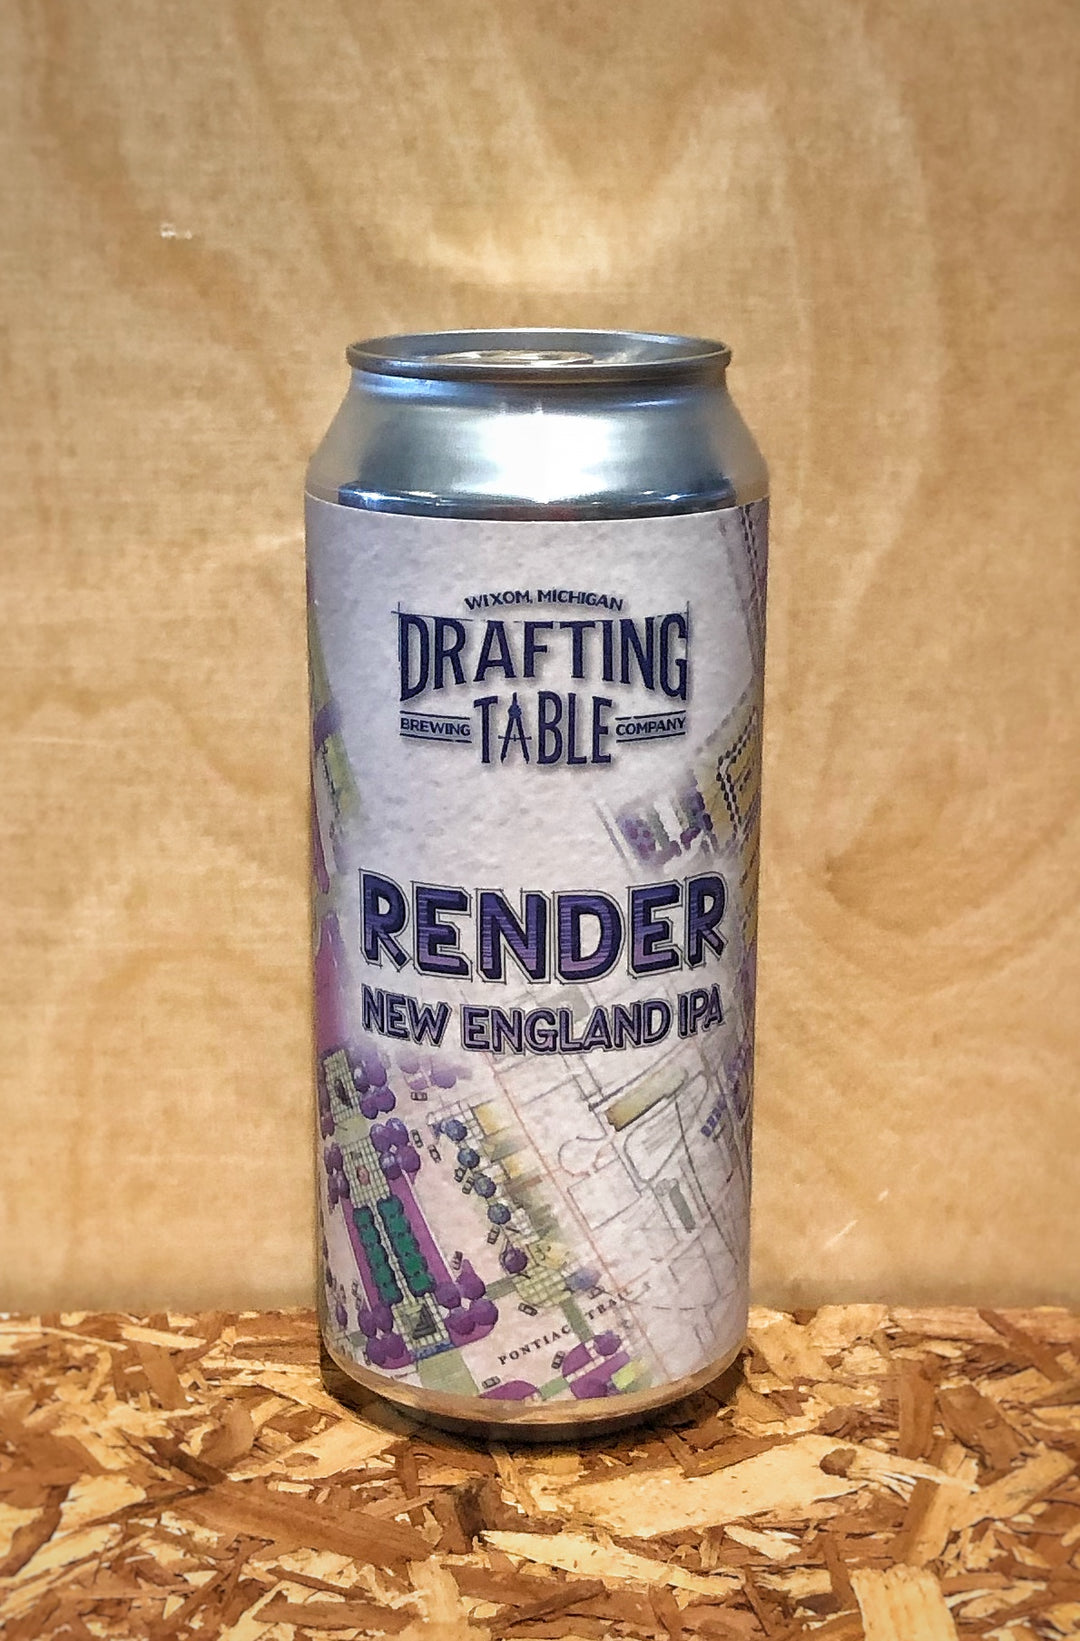 Drafting Table 'Render' New England IPA (Wixom, MI)